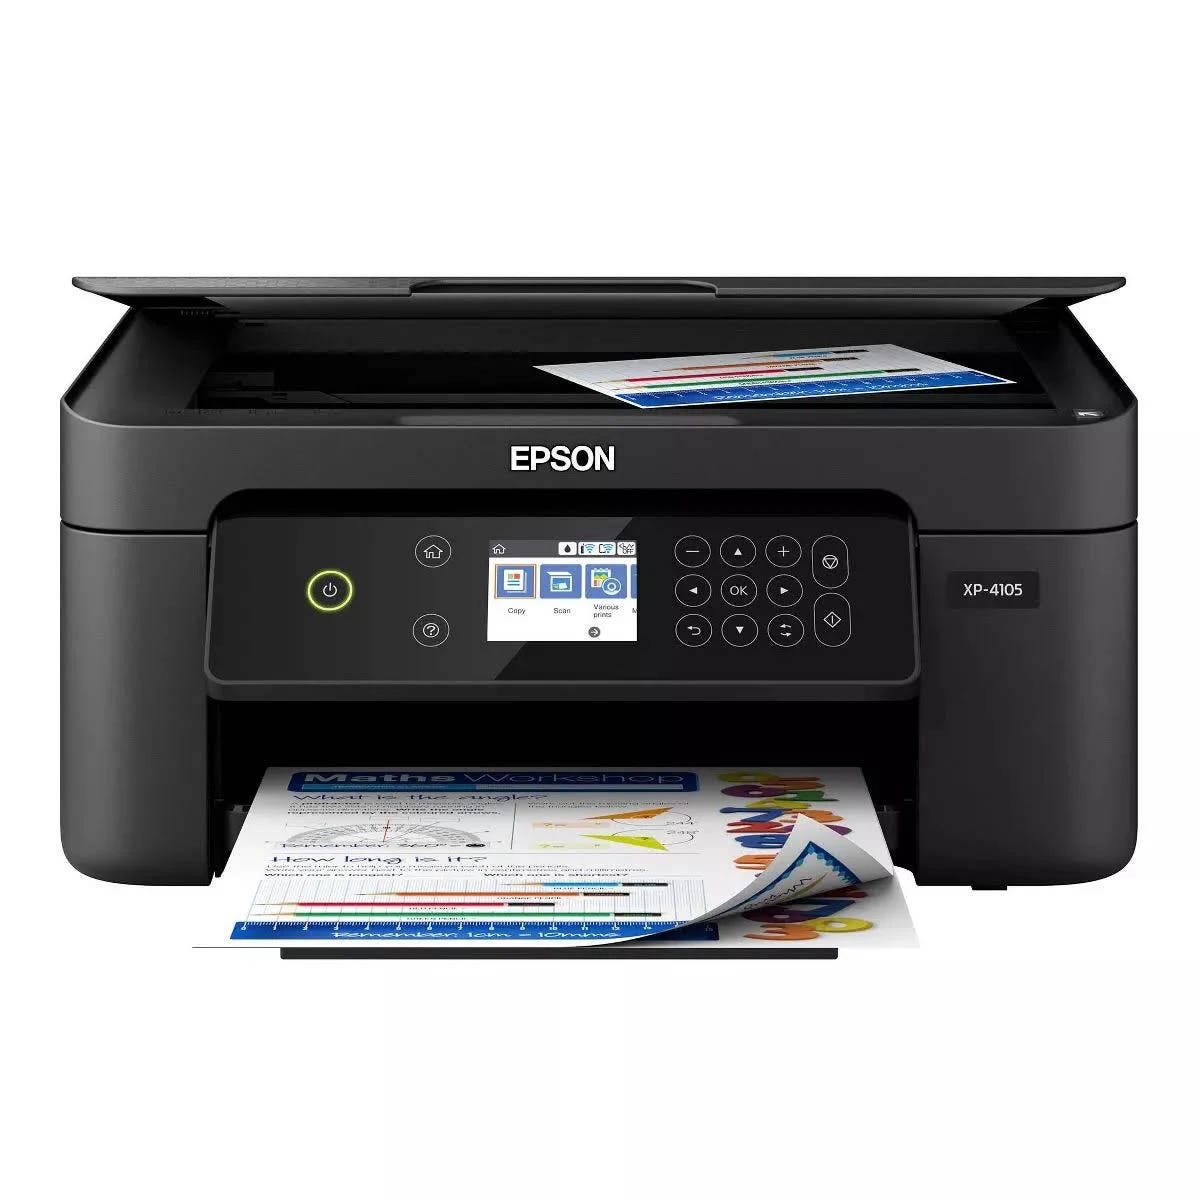 Epson XP-4105 Wireless Color Inkjet Printer with Instant-Dry Technology | Image